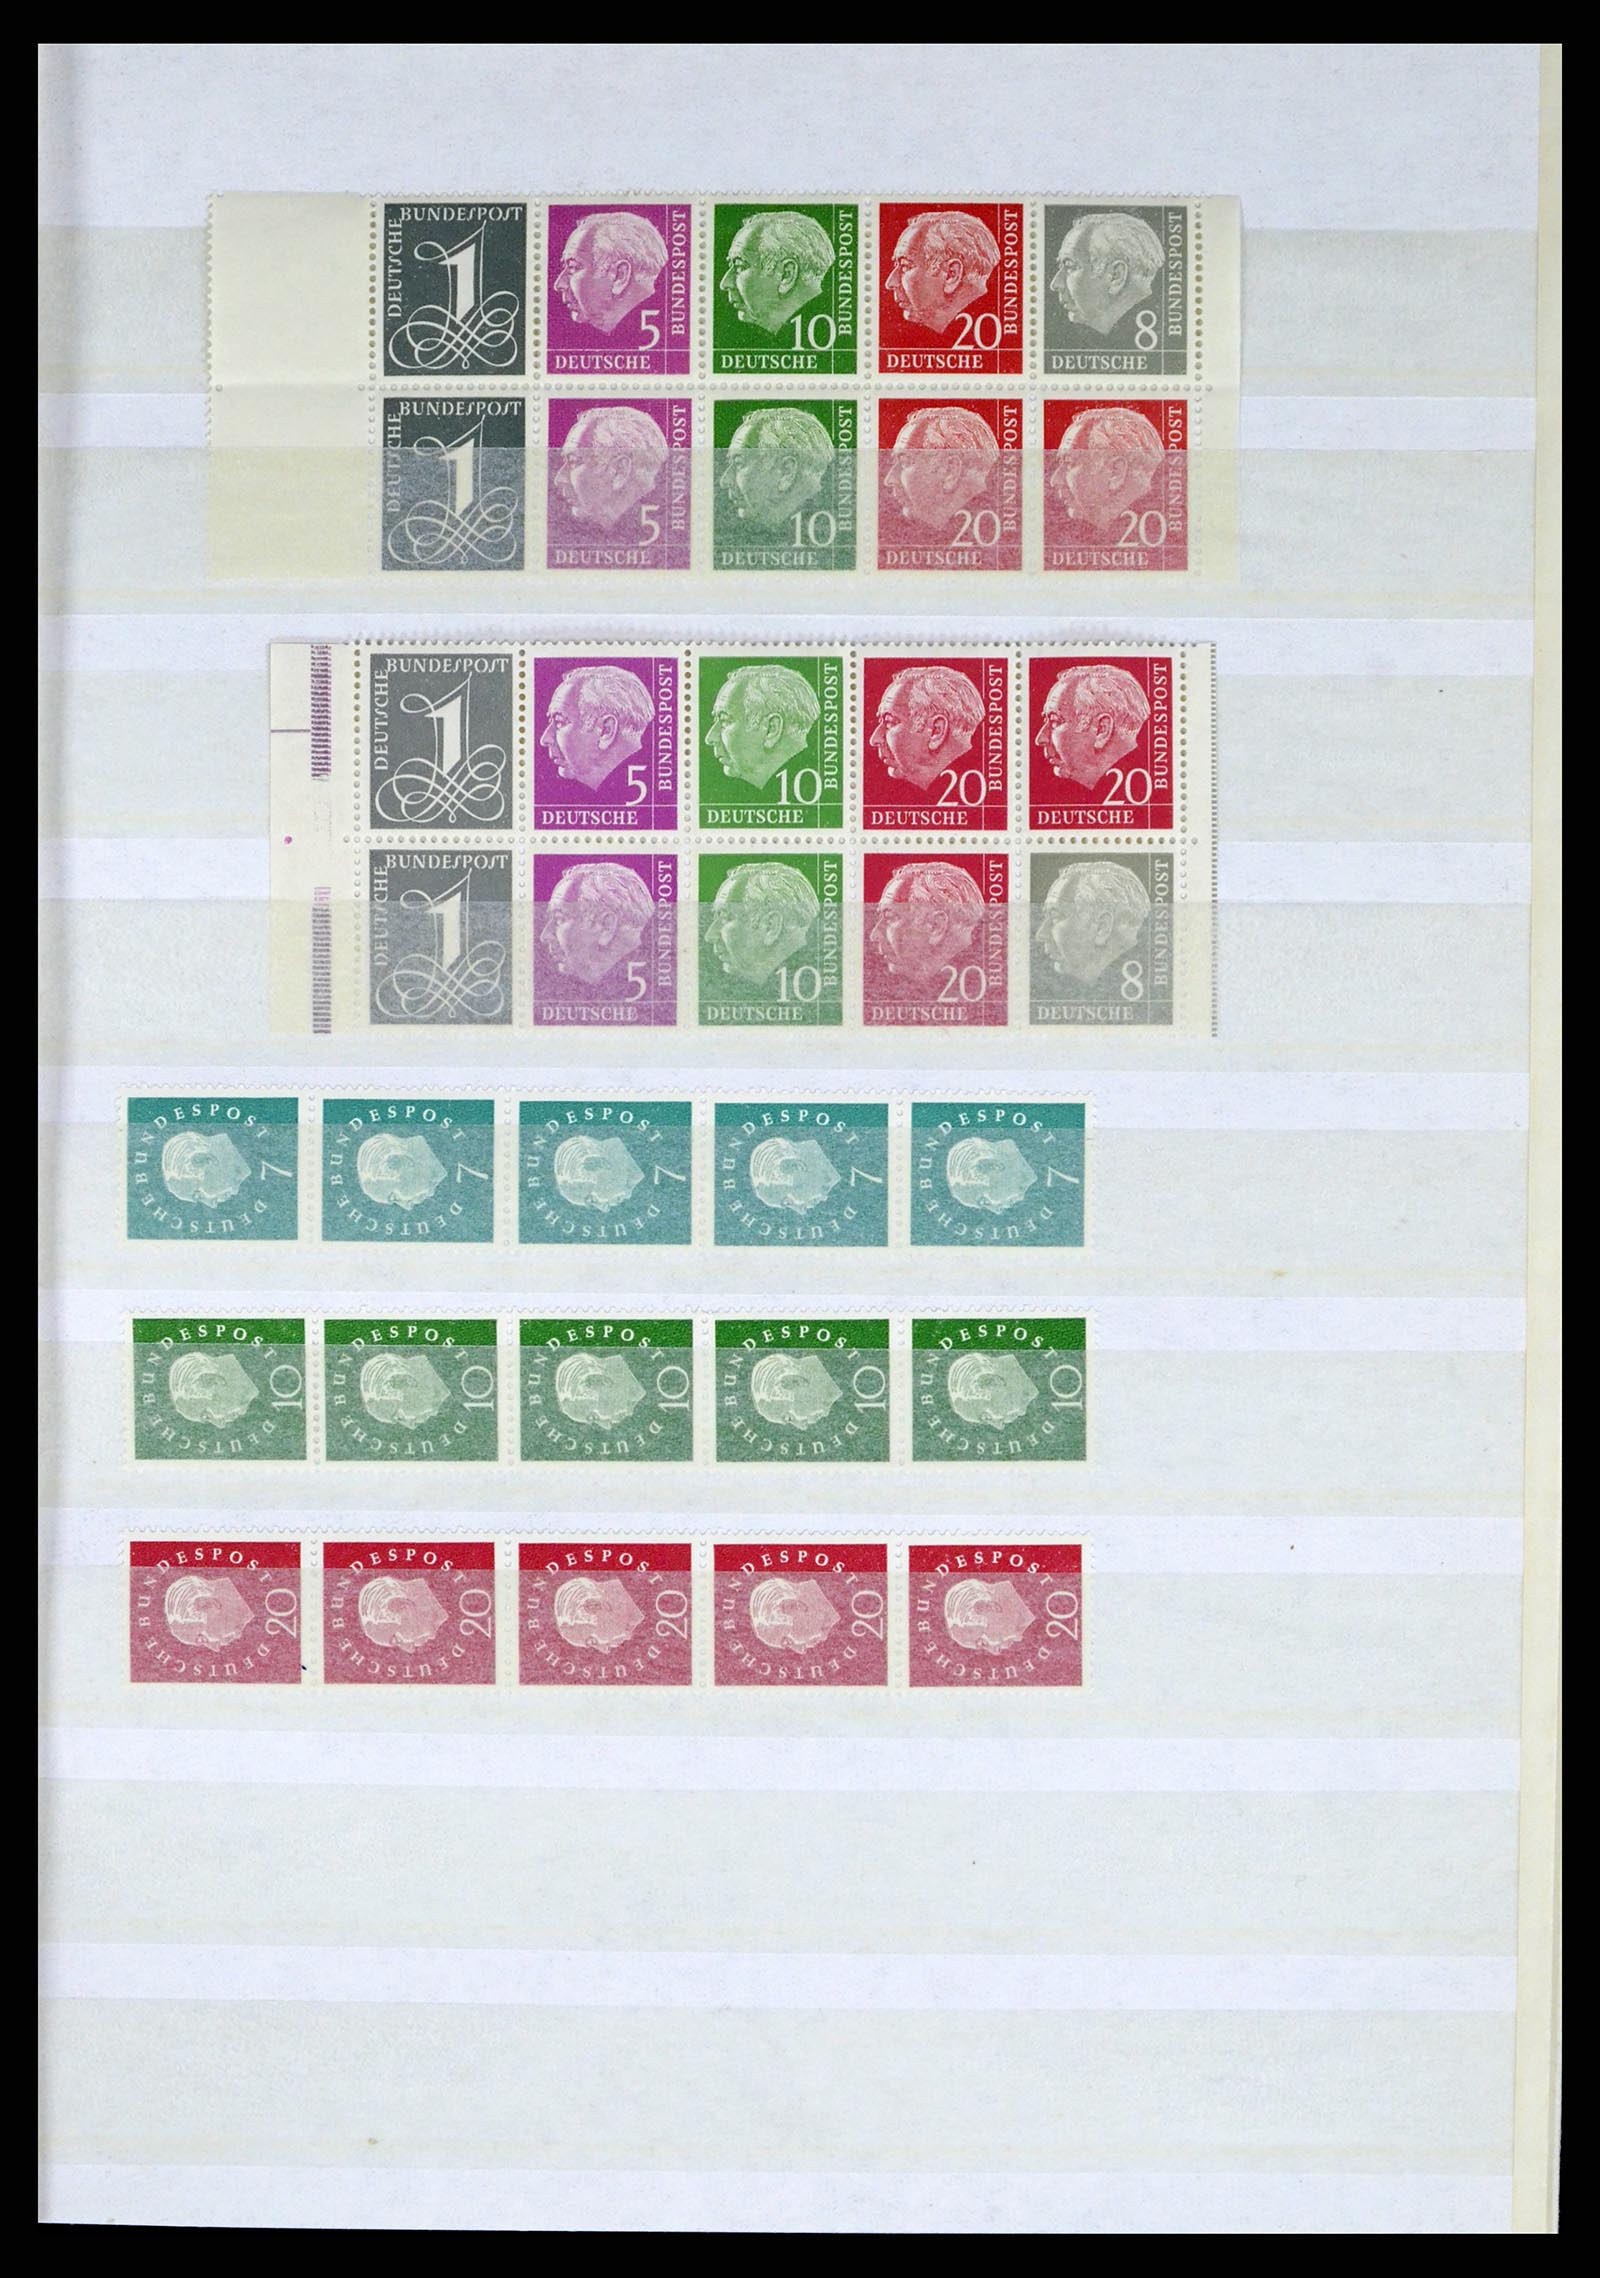 37354 053 - Stamp collection 37354 Bundespost and Berlin 1955-2000.